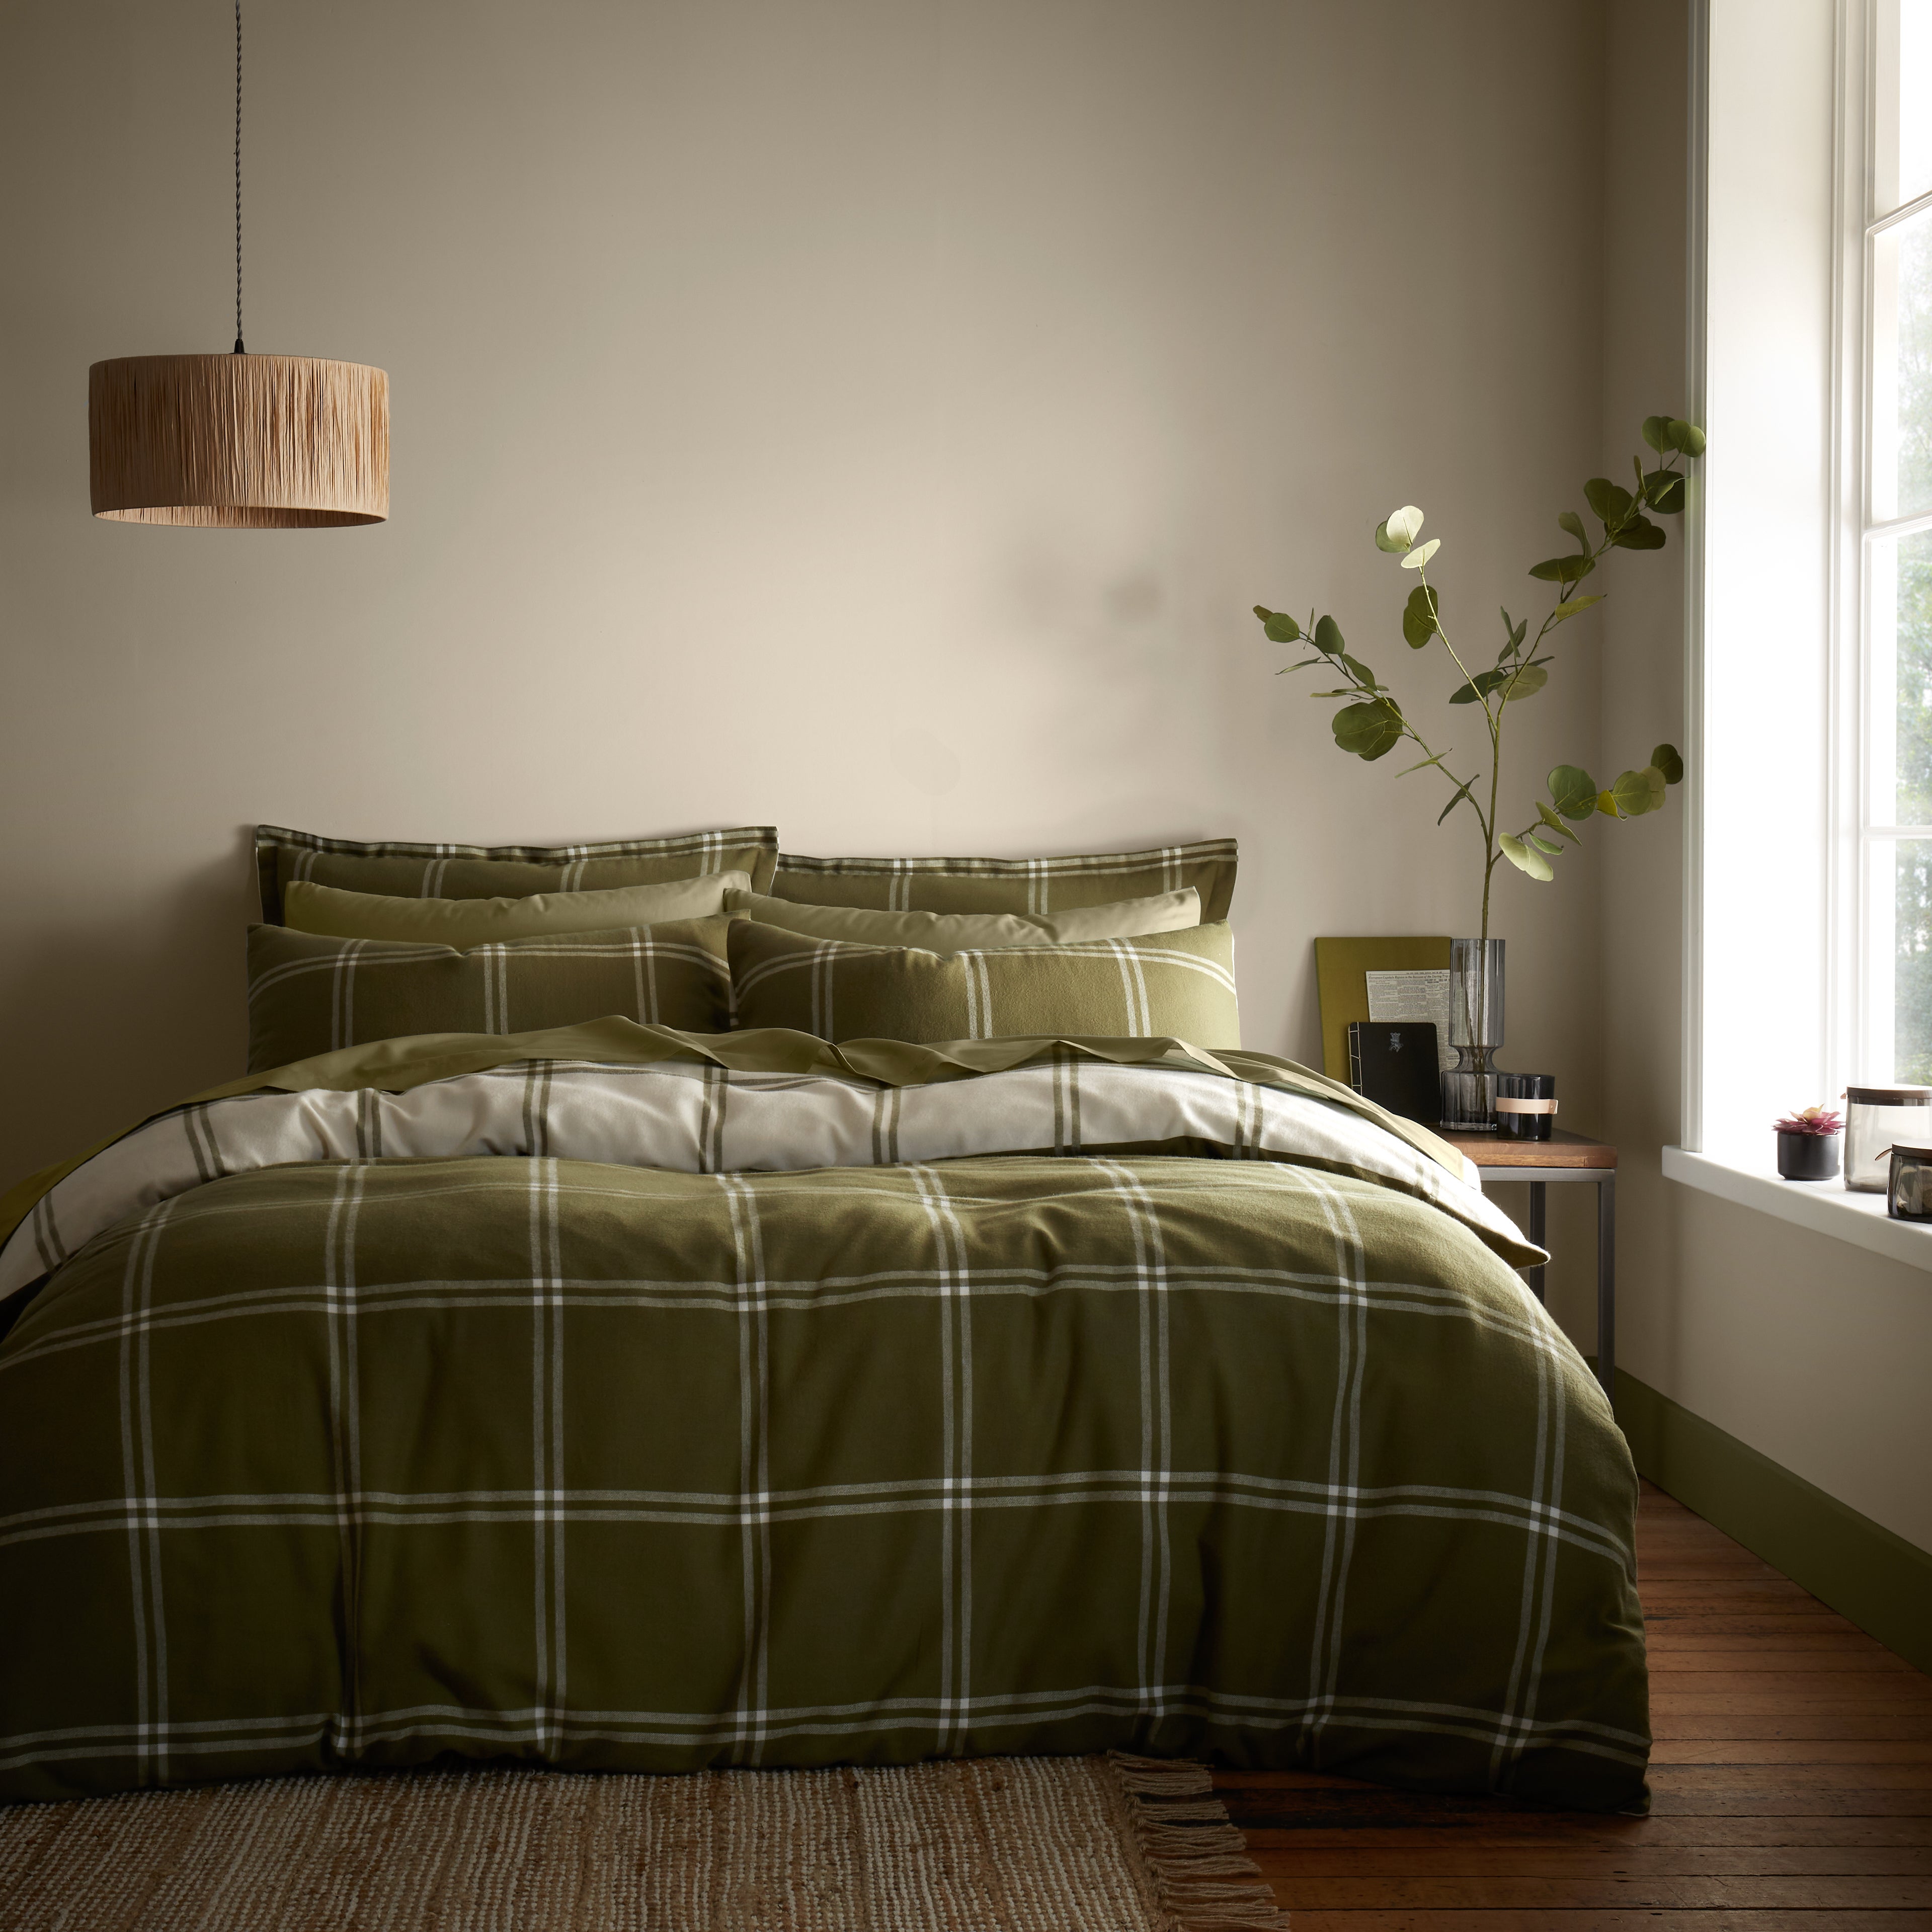 Stanway Check Natural Cotton Duvet Cover and Pillowcase Set